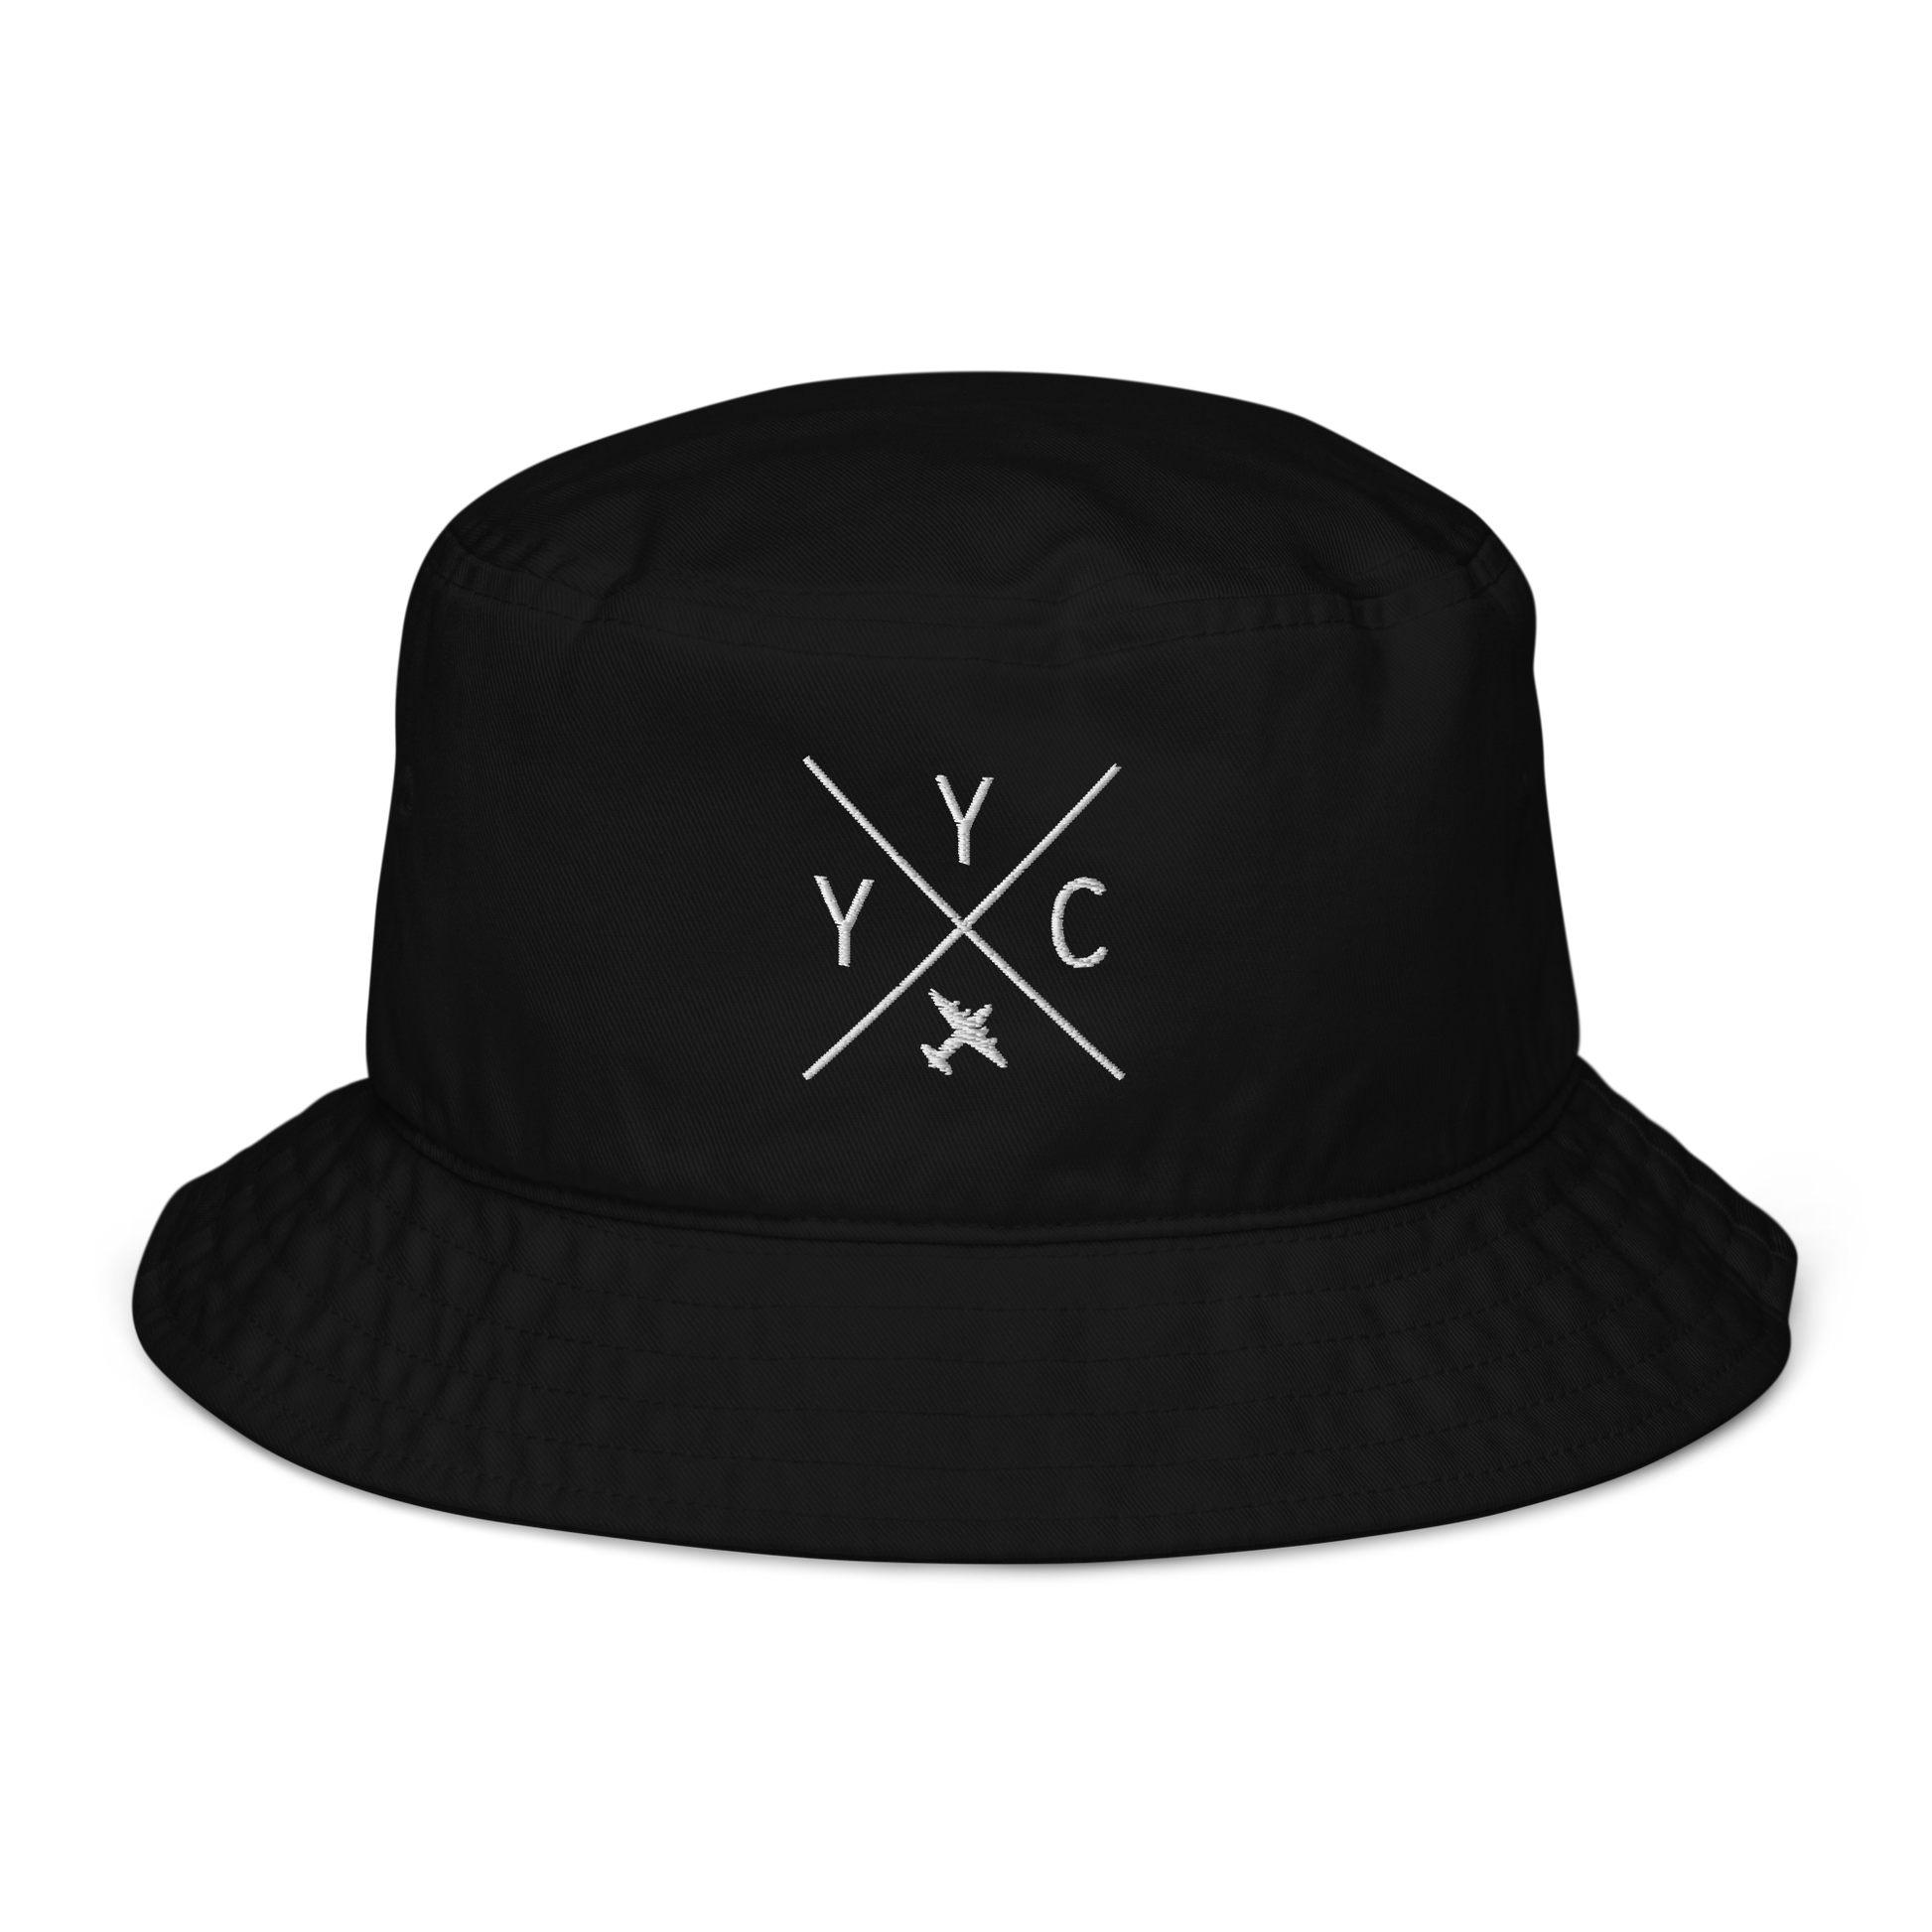 YHM Designs - YYC Calgary Organic Cotton Bucket Hat - Crossed-X Design with Airport Code and Vintage Propliner - White Embroidery - Image 01